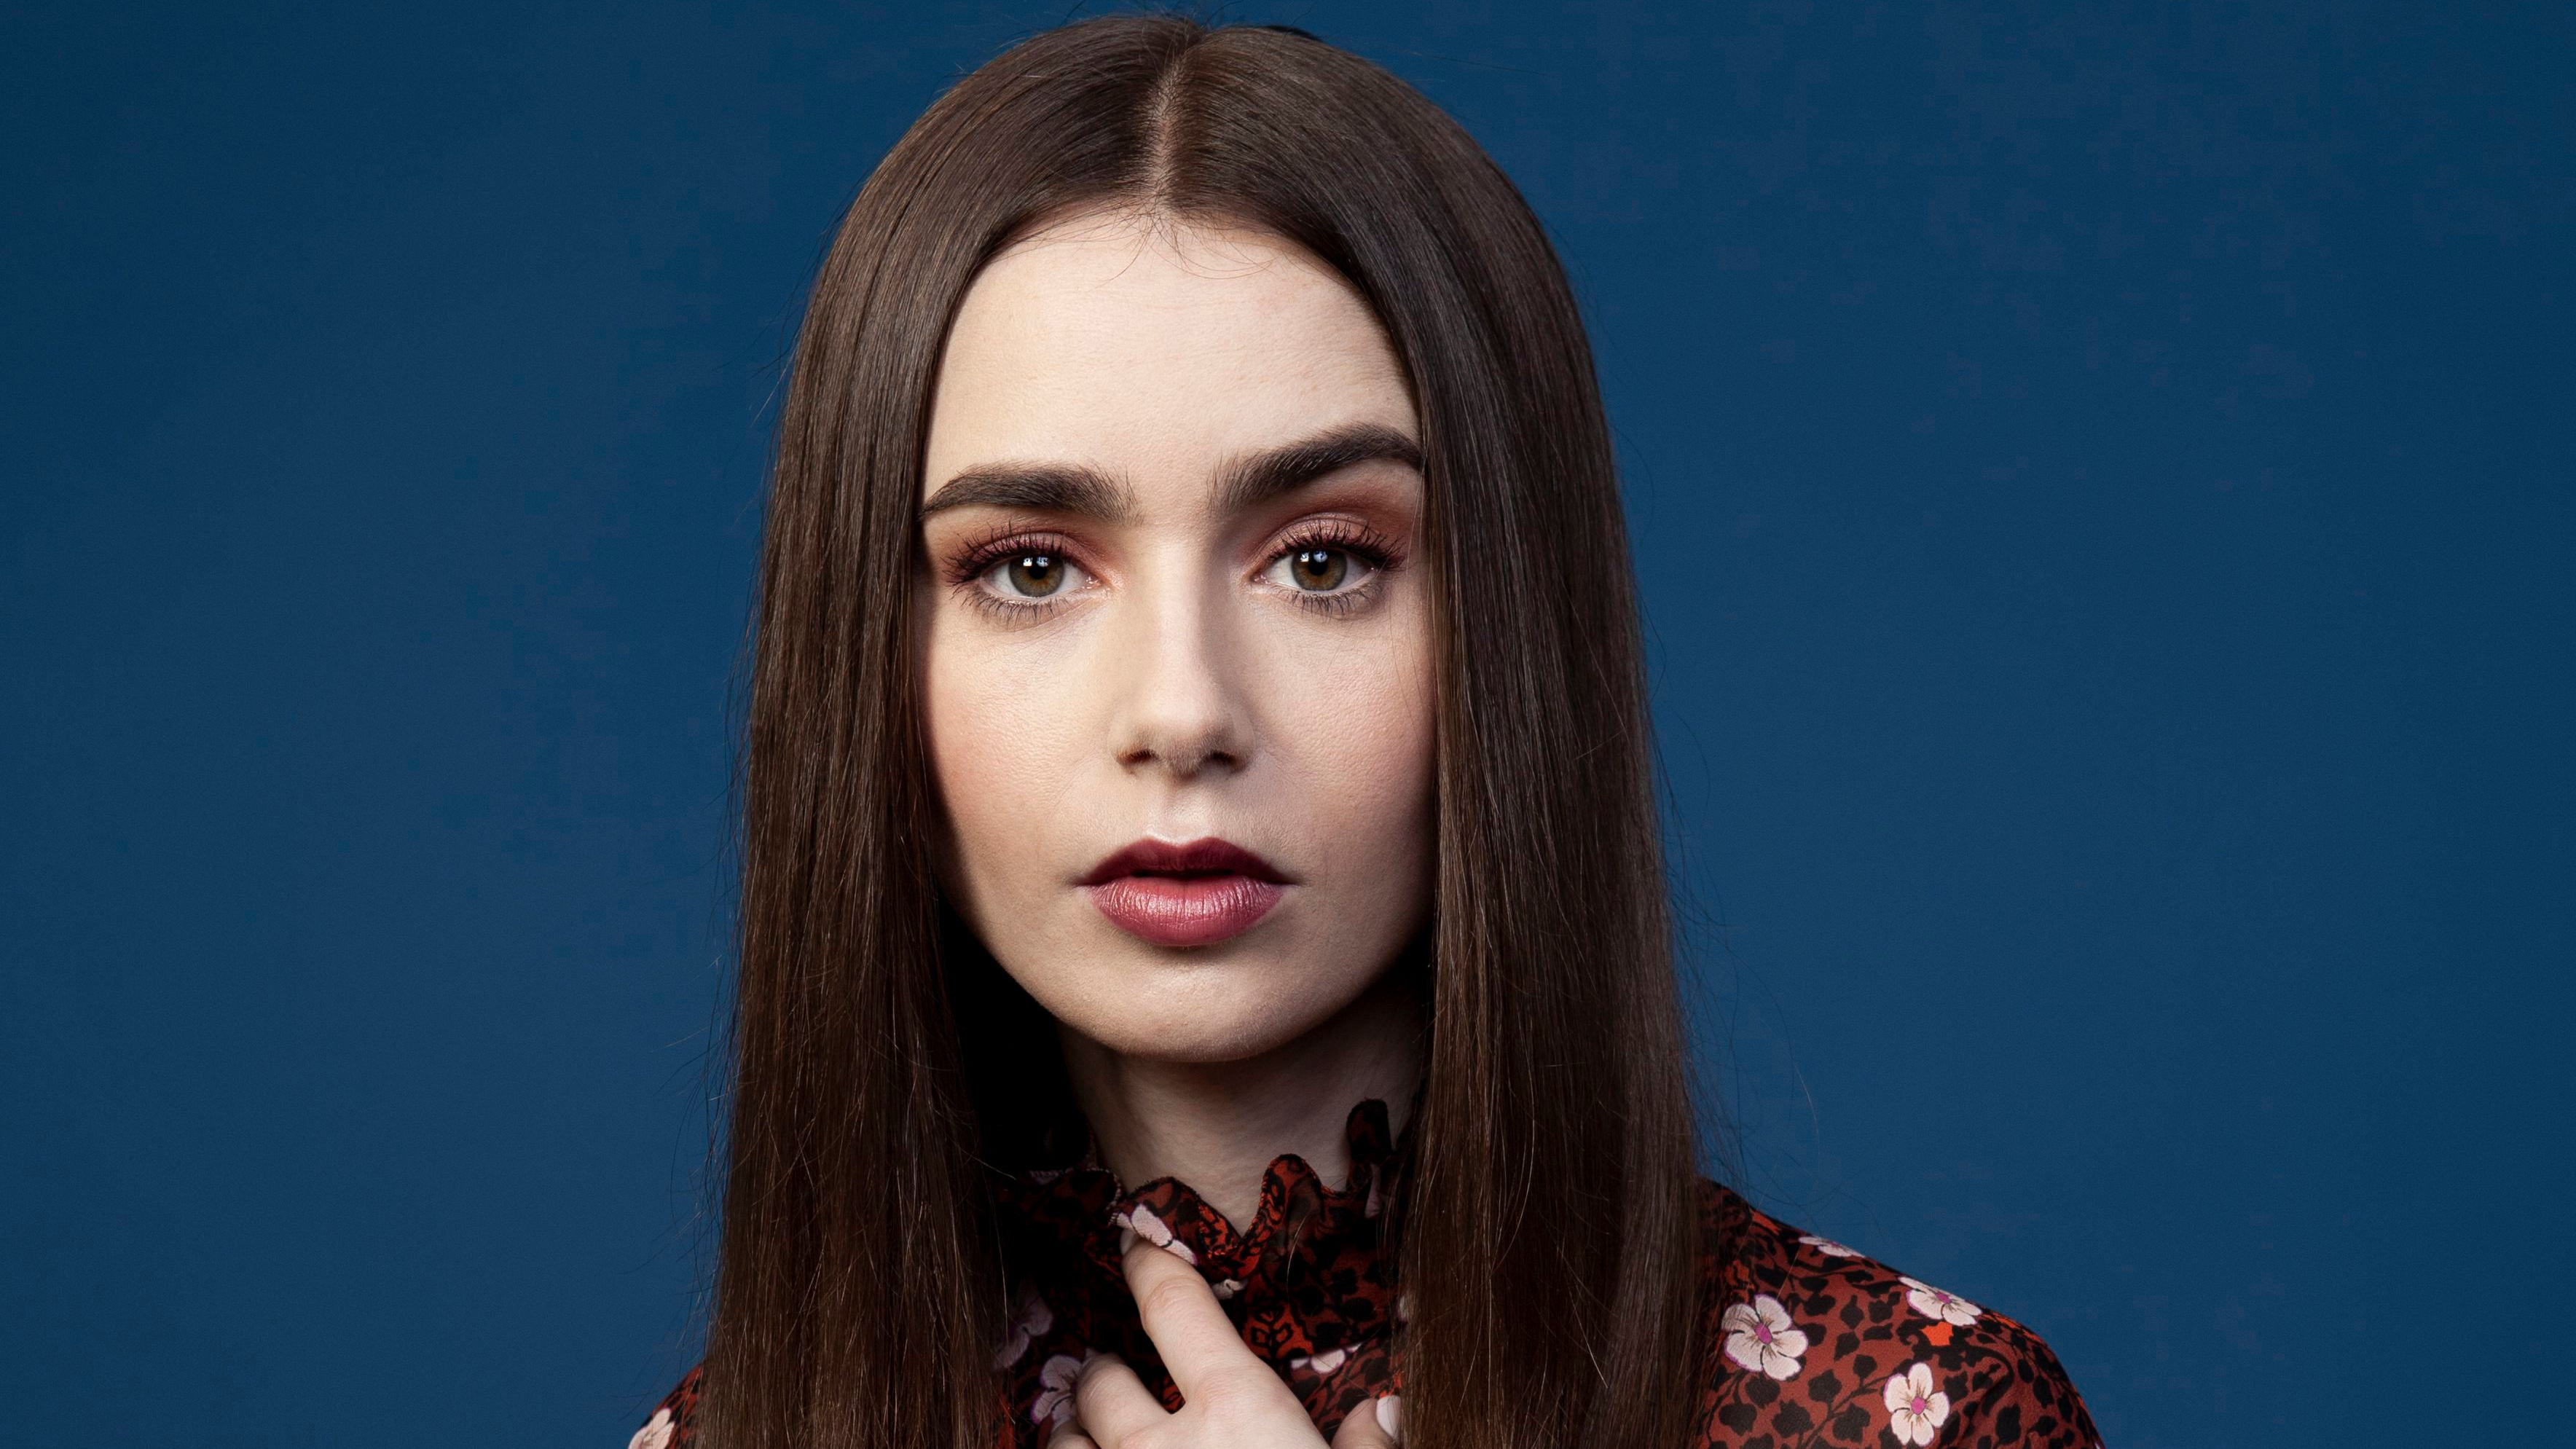 Lily Collins 2019, Portraits of a celebrity, High-definition wallpapers, Mesmerizing images, 3540x1990 HD Desktop